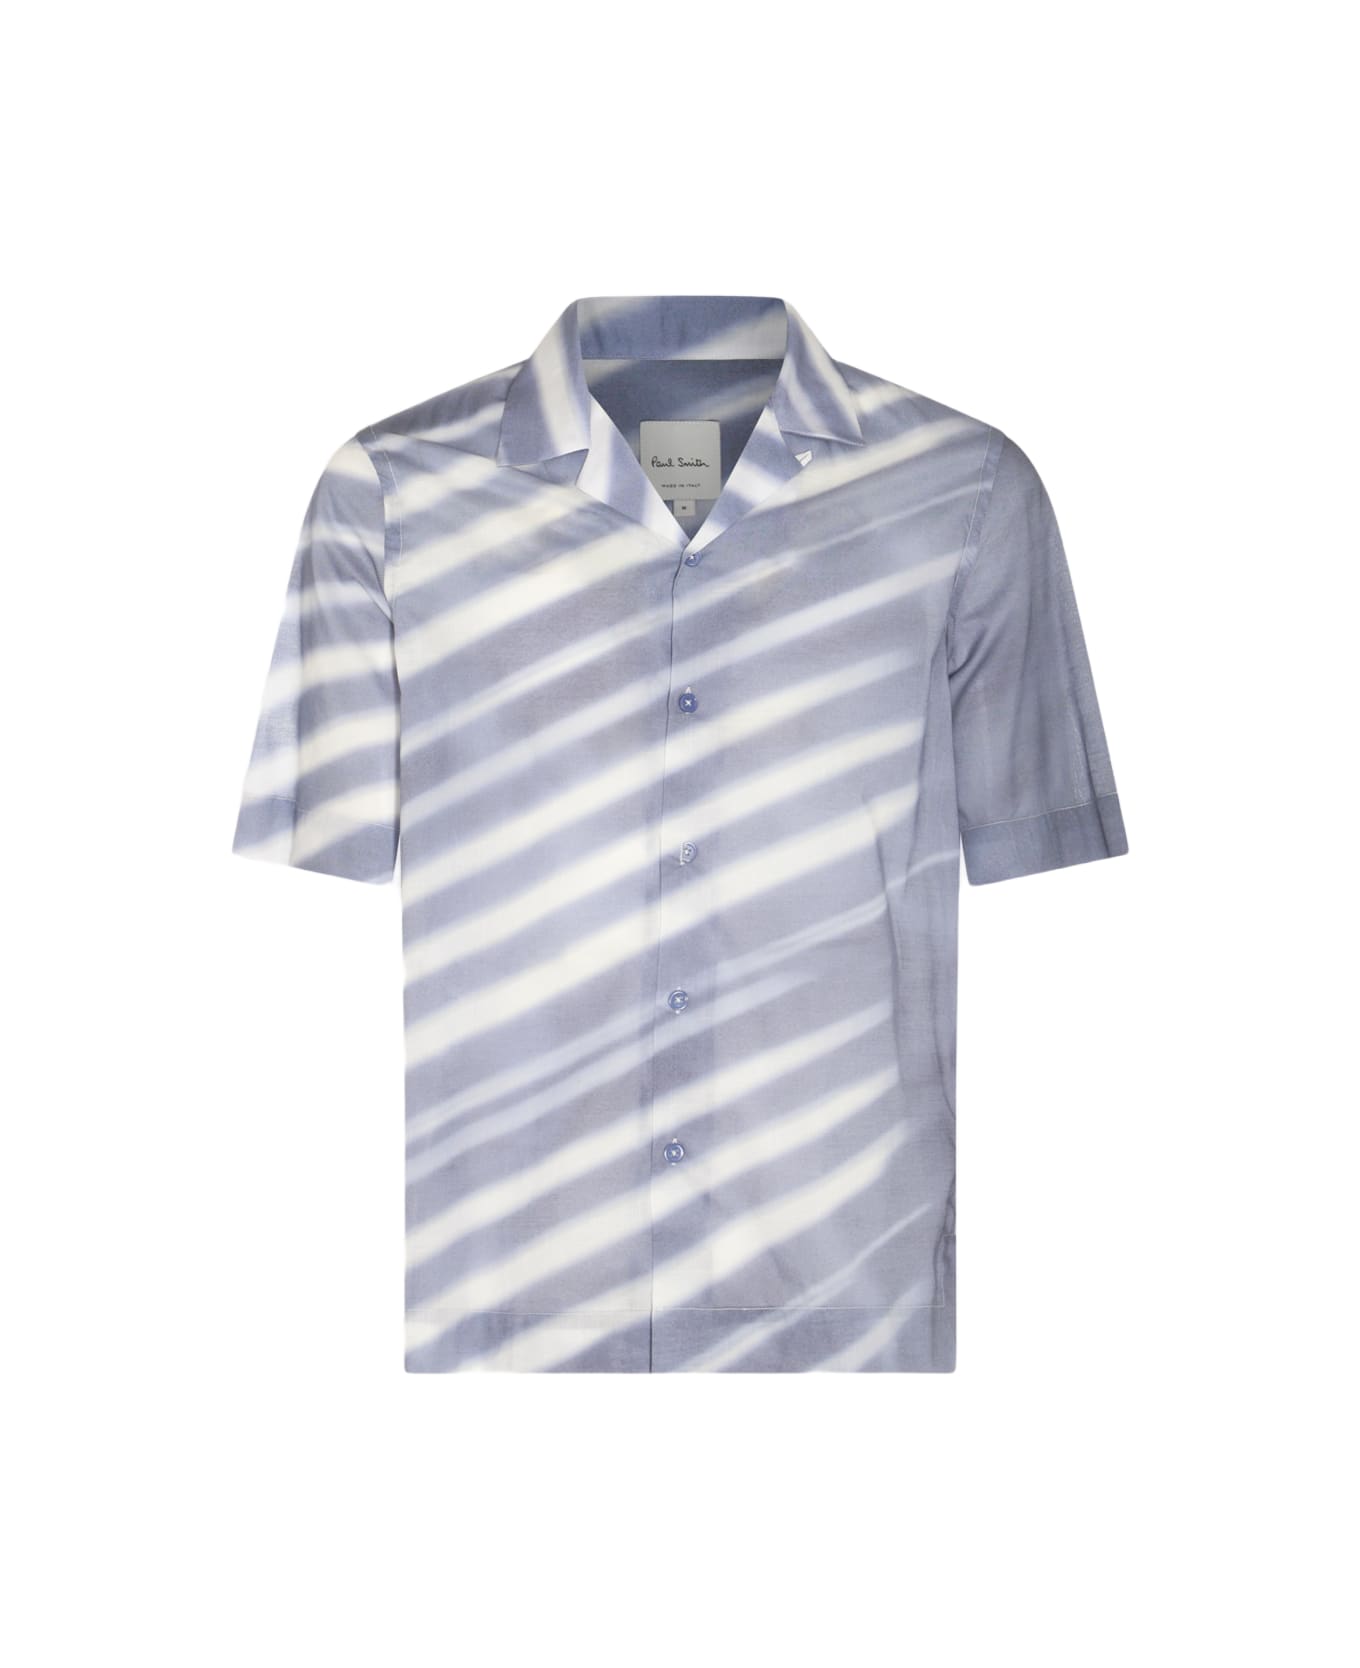 Paul Smith Blue And White Cotton Shirt - Blue